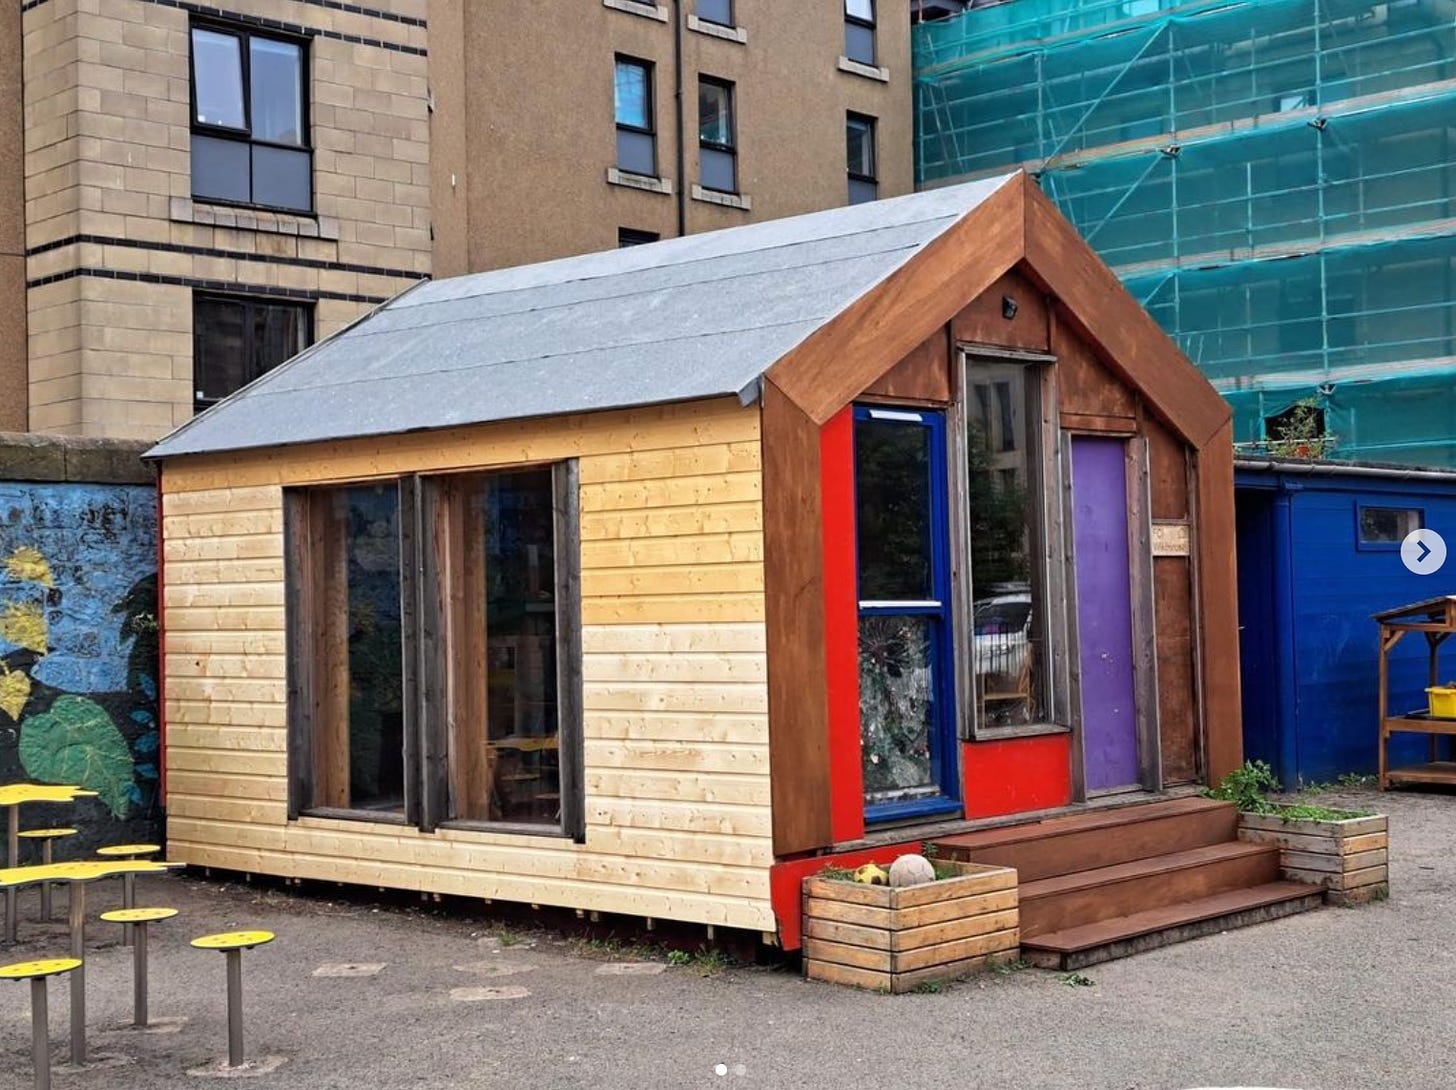 A one storey pitched roof refurbished outdoor classroom set in a school playground